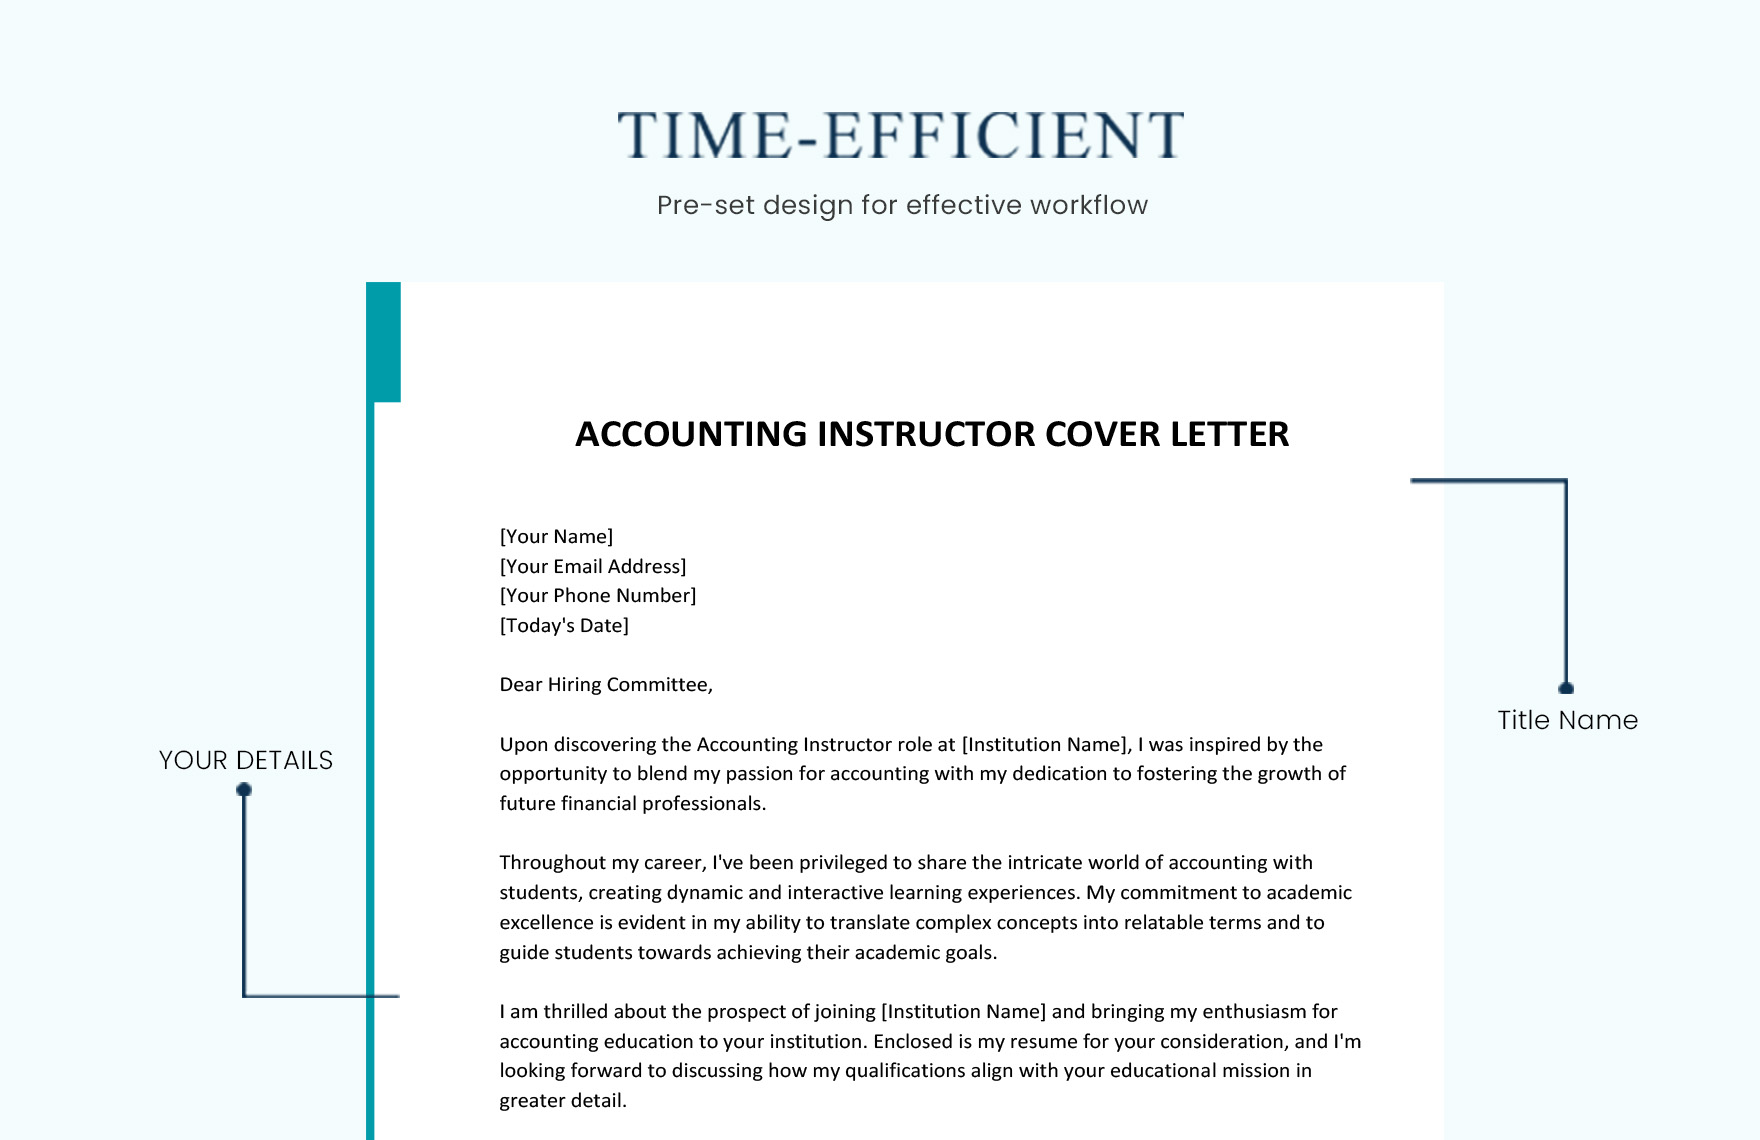 Accounting Instructor Cover Letter